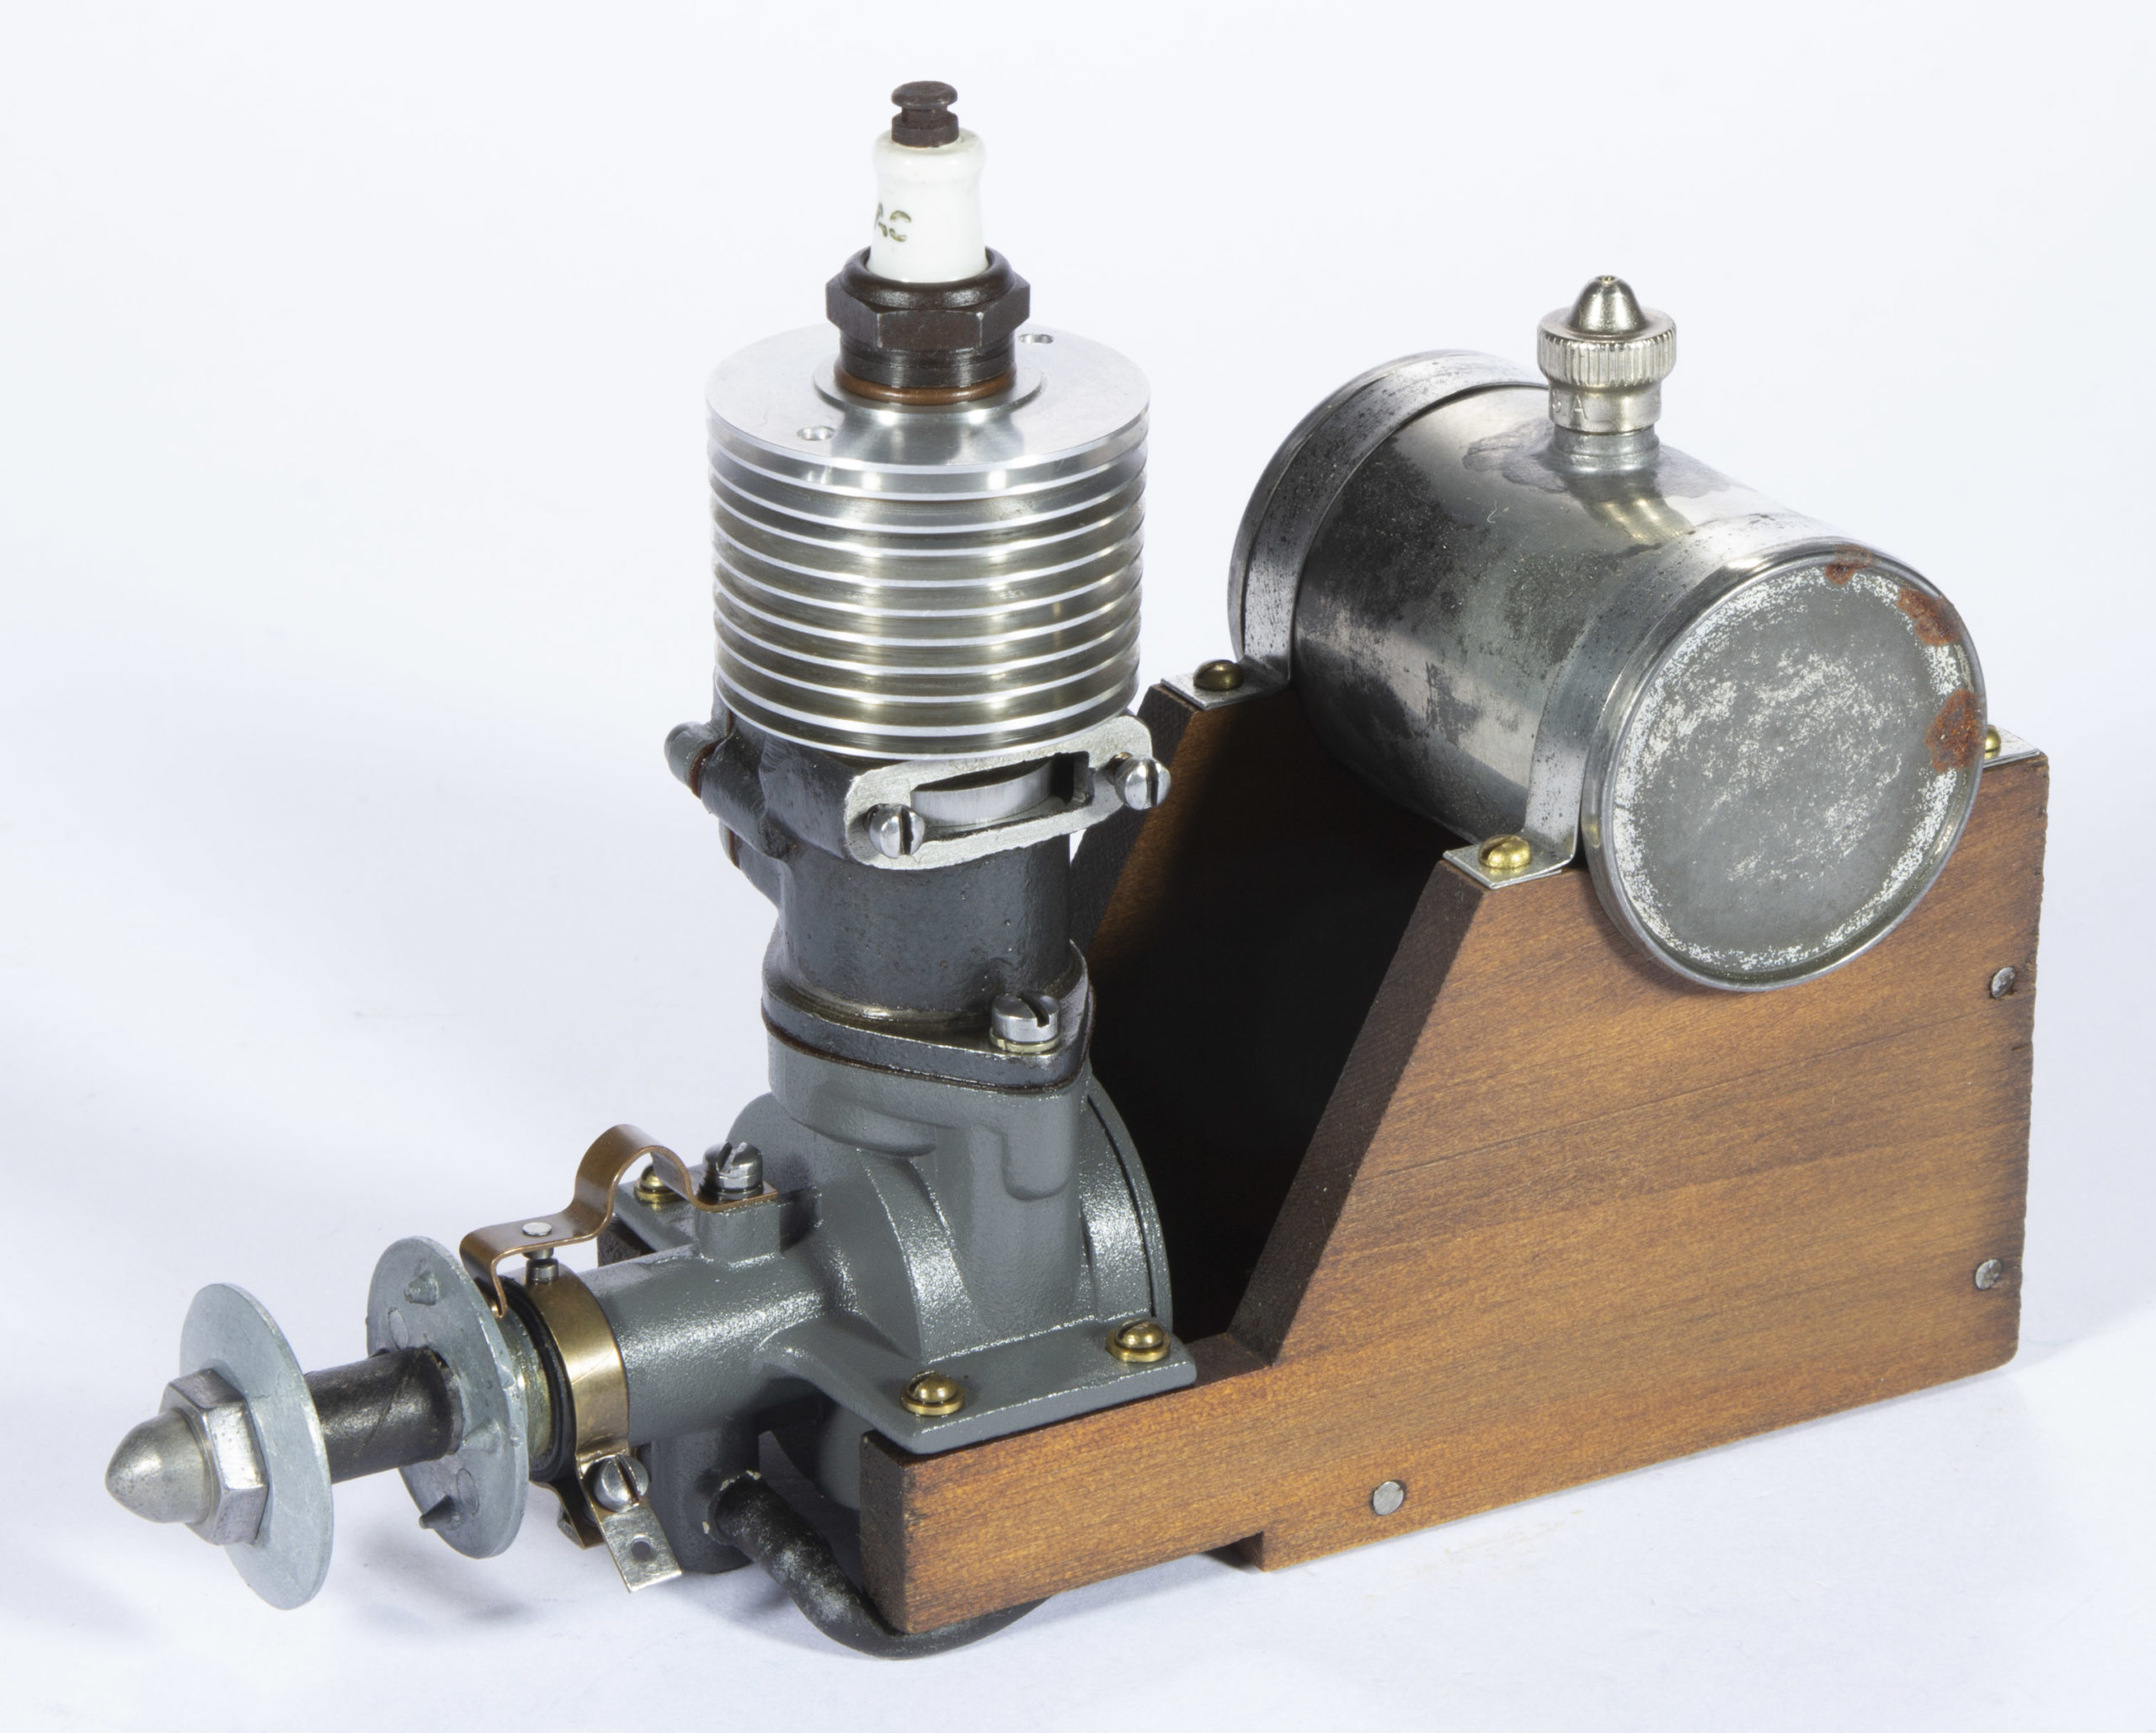 AIRCRAFT INDUSTRIES “BABY CYCLONE” MODEL A 1936 MODEL AIRPLANE ENGINE,